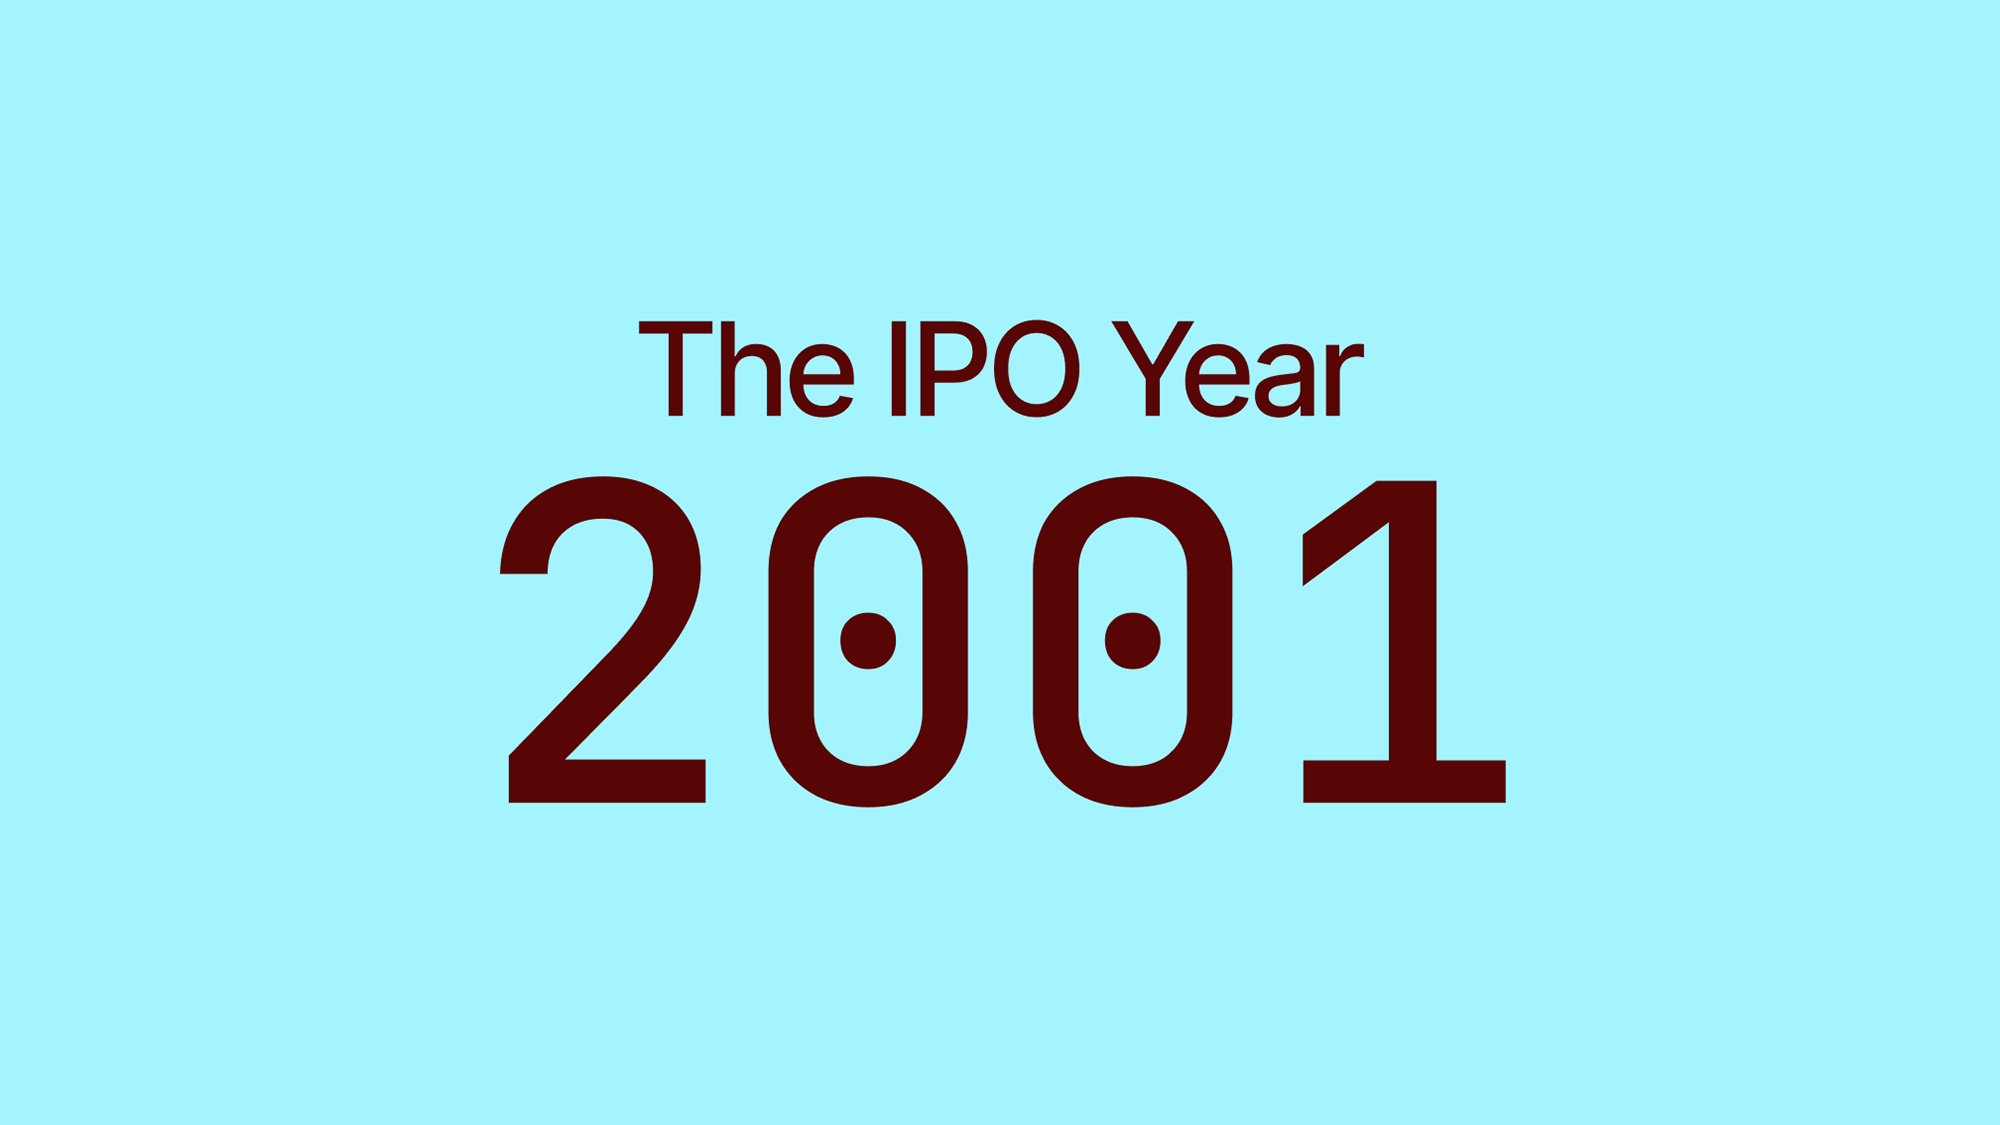 The IPO Year of 2001